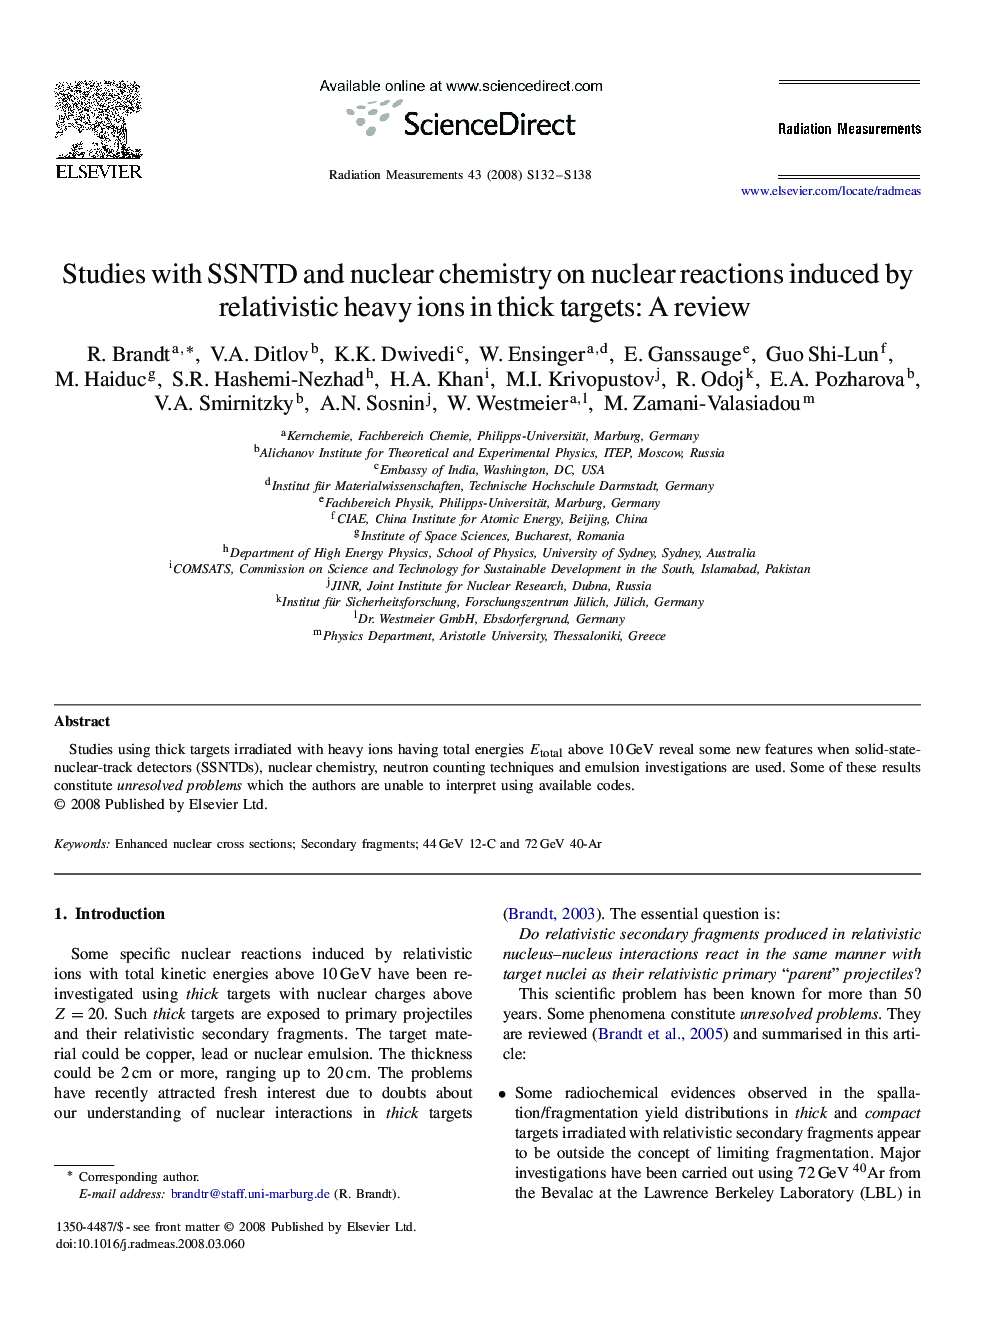 Studies with SSNTD and nuclear chemistry on nuclear reactions induced by relativistic heavy ions in thick targets: A review